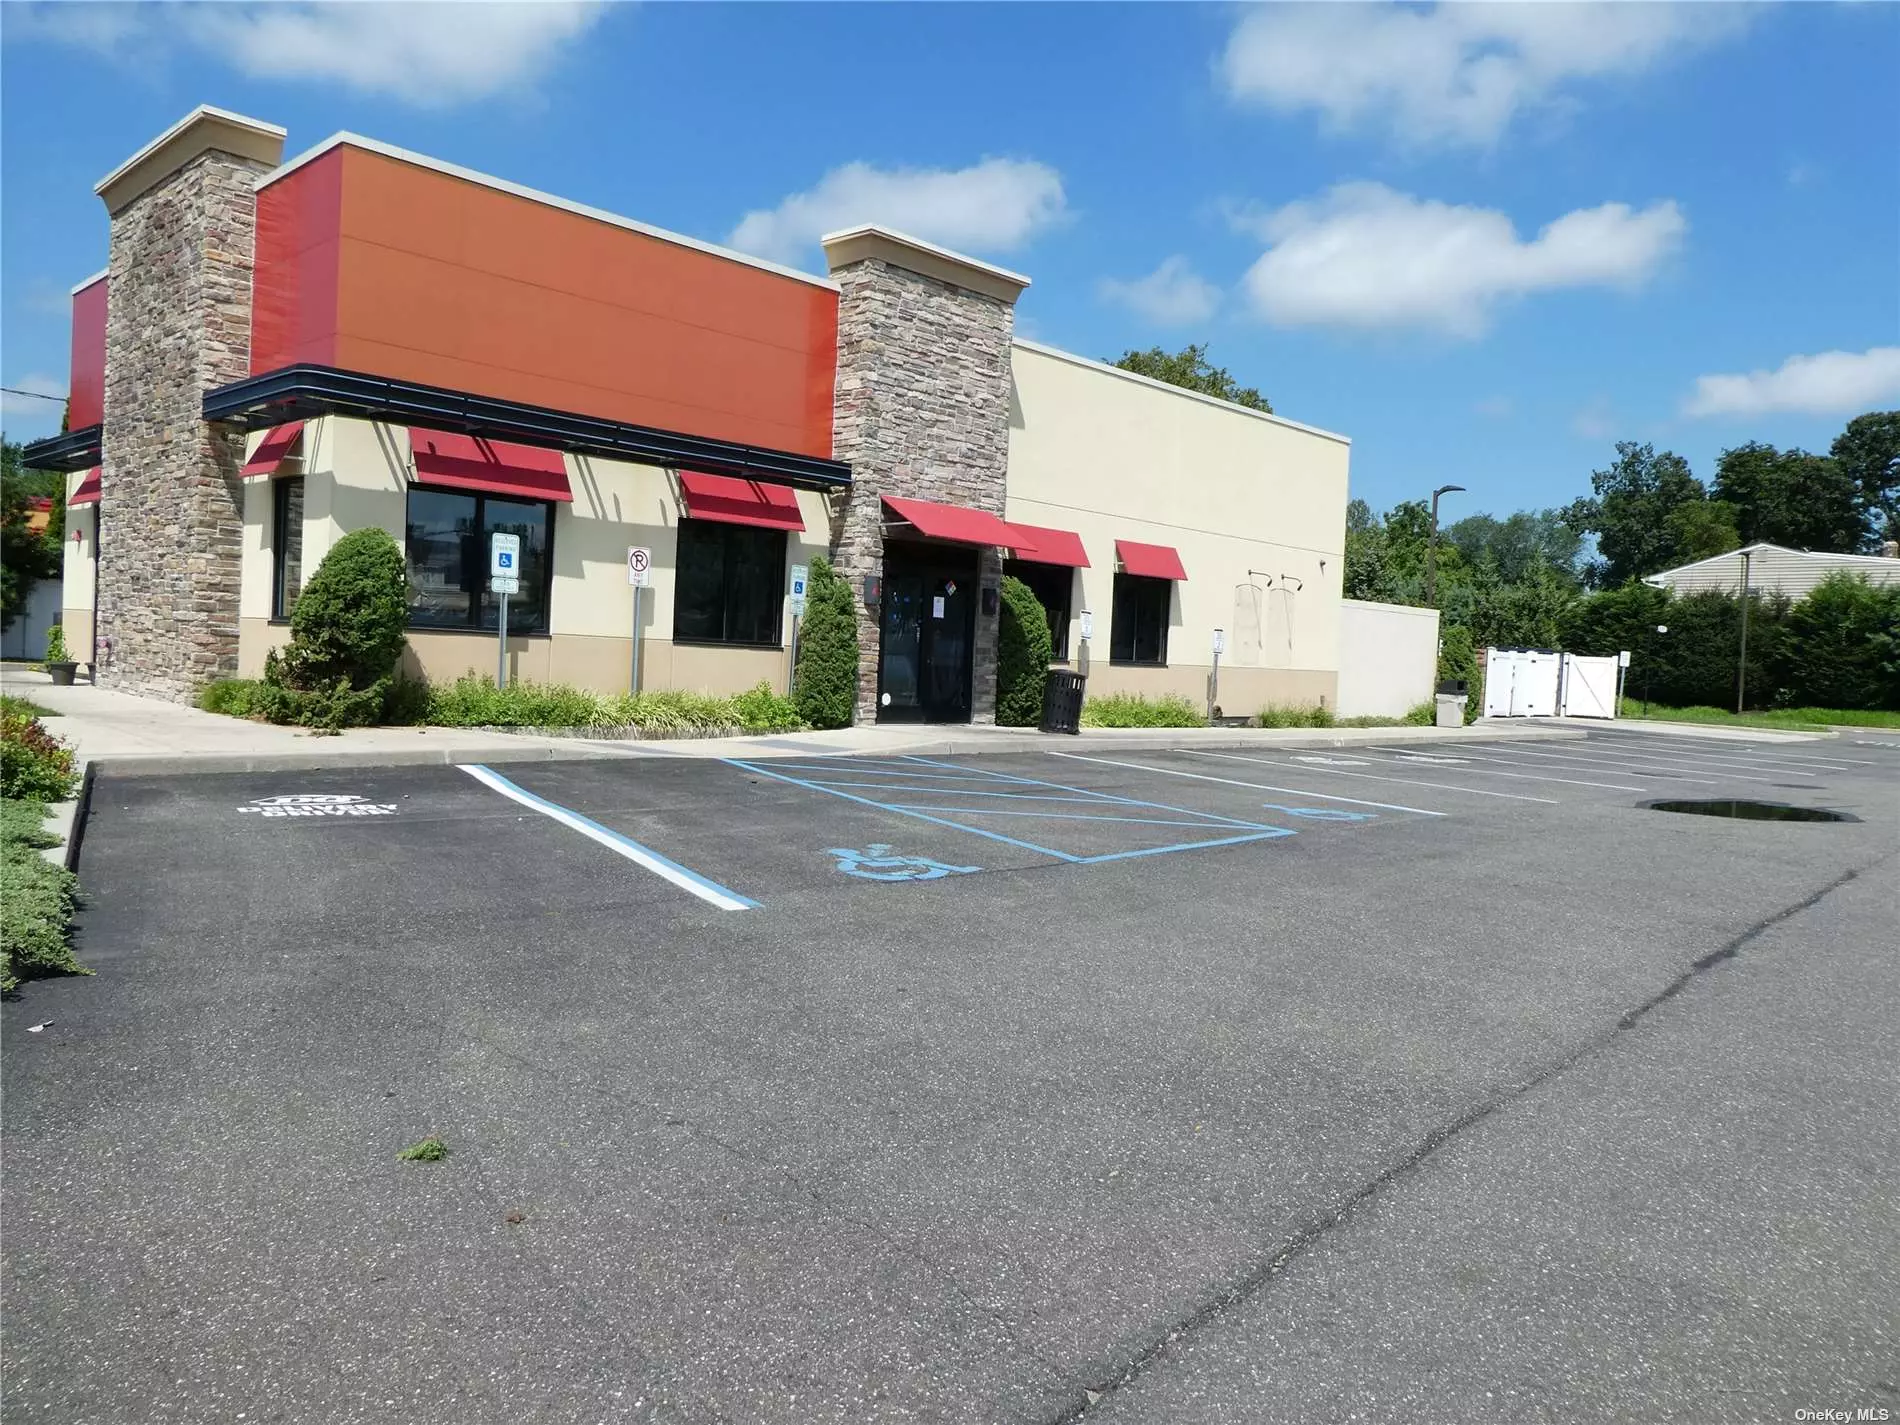 Welcome to an exceptional opportunity for a fast food franchise in a prime location. This high visibility property offers everything a thriving fast food business needs, including a drive-through, 30+ parking spaces, and a hassle-free triple-net lease-8 yr old building.